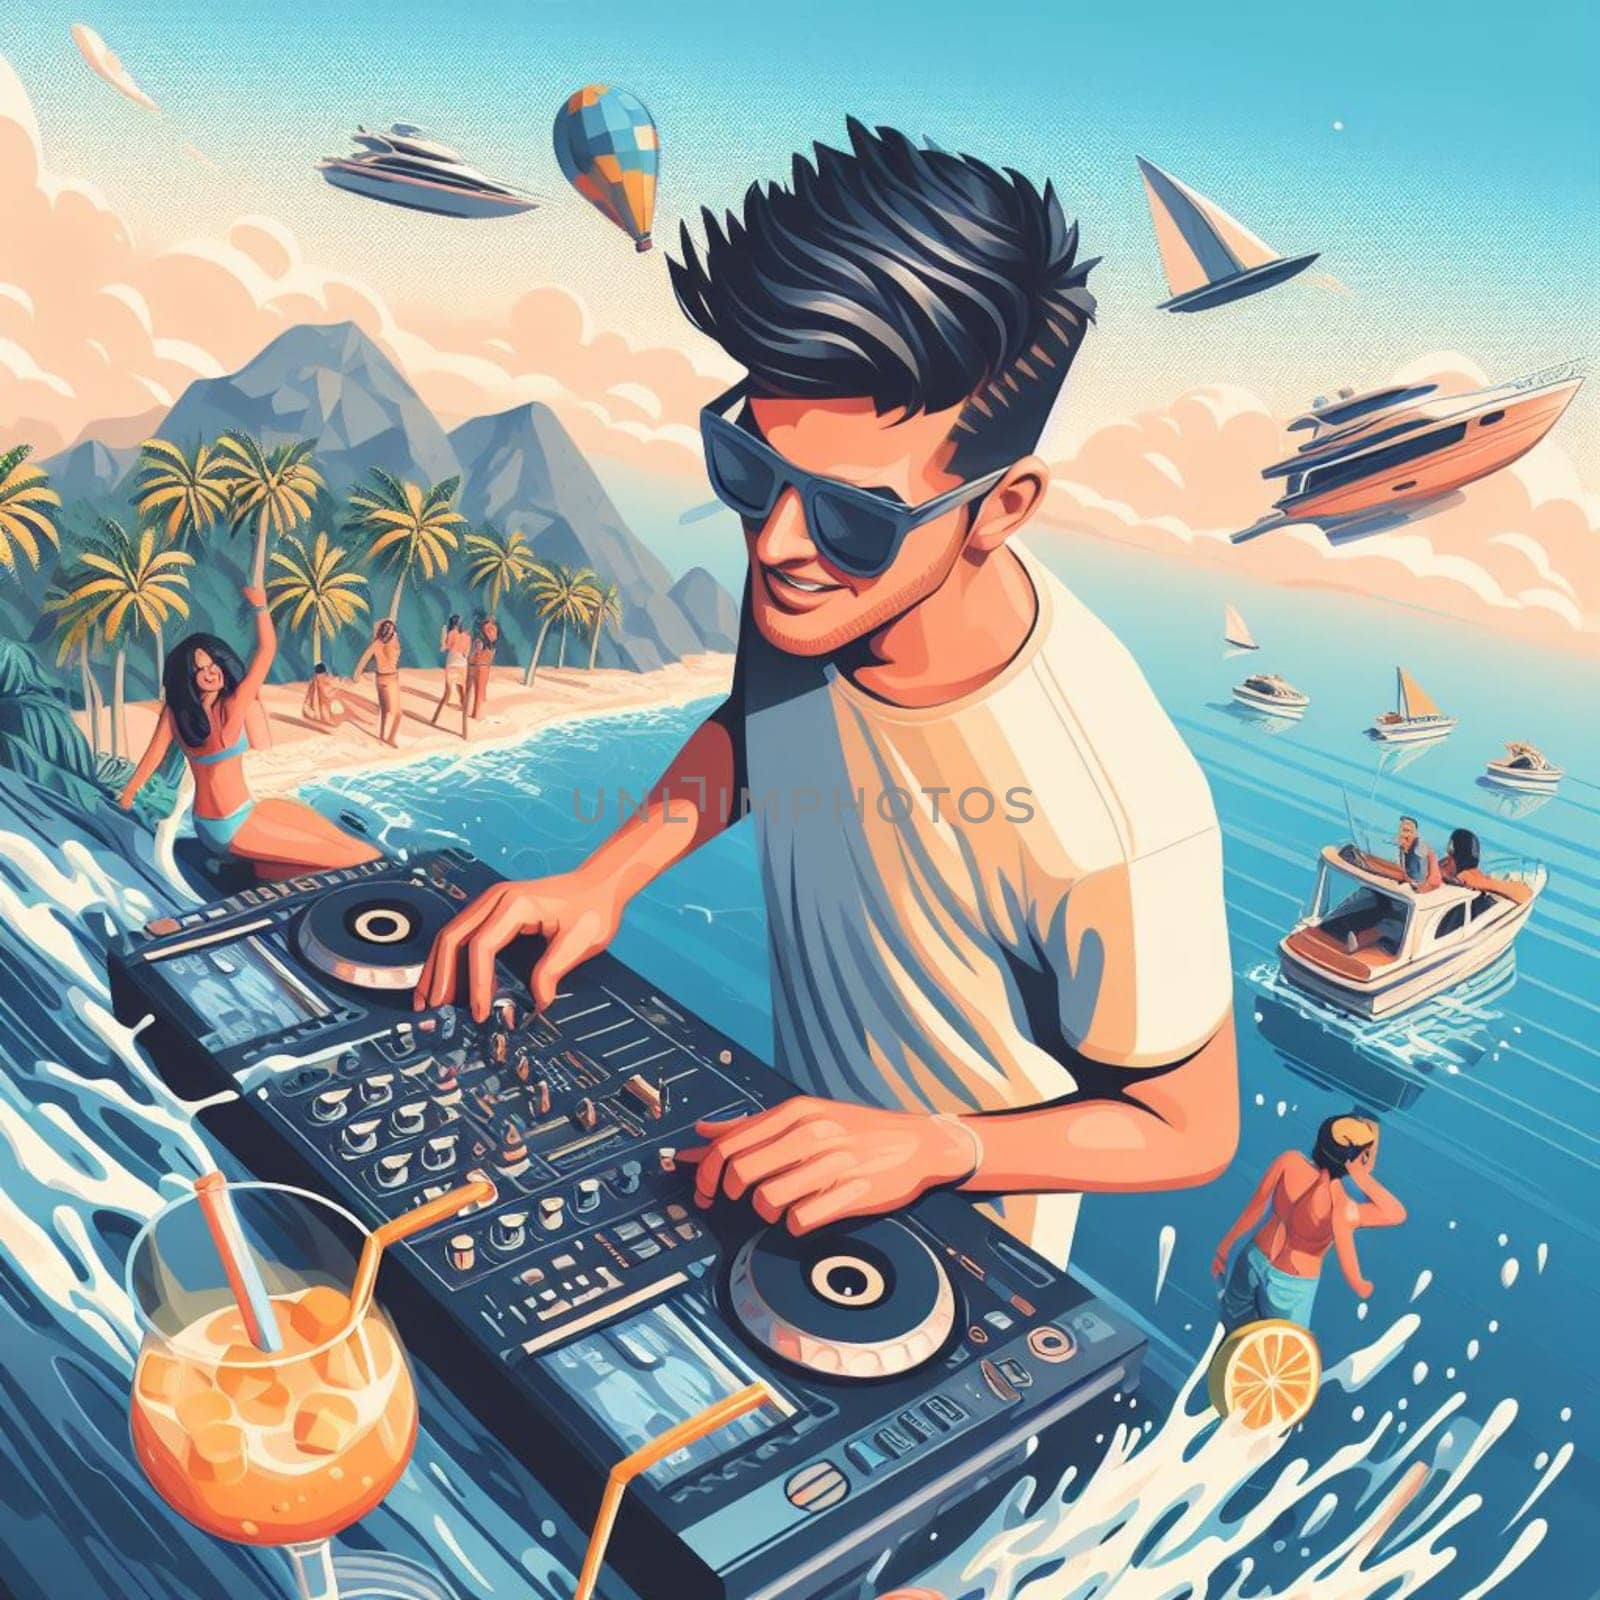 young deejay, wear glasses earphone hosting dj set at crowded beach party tropical island isometric by verbano